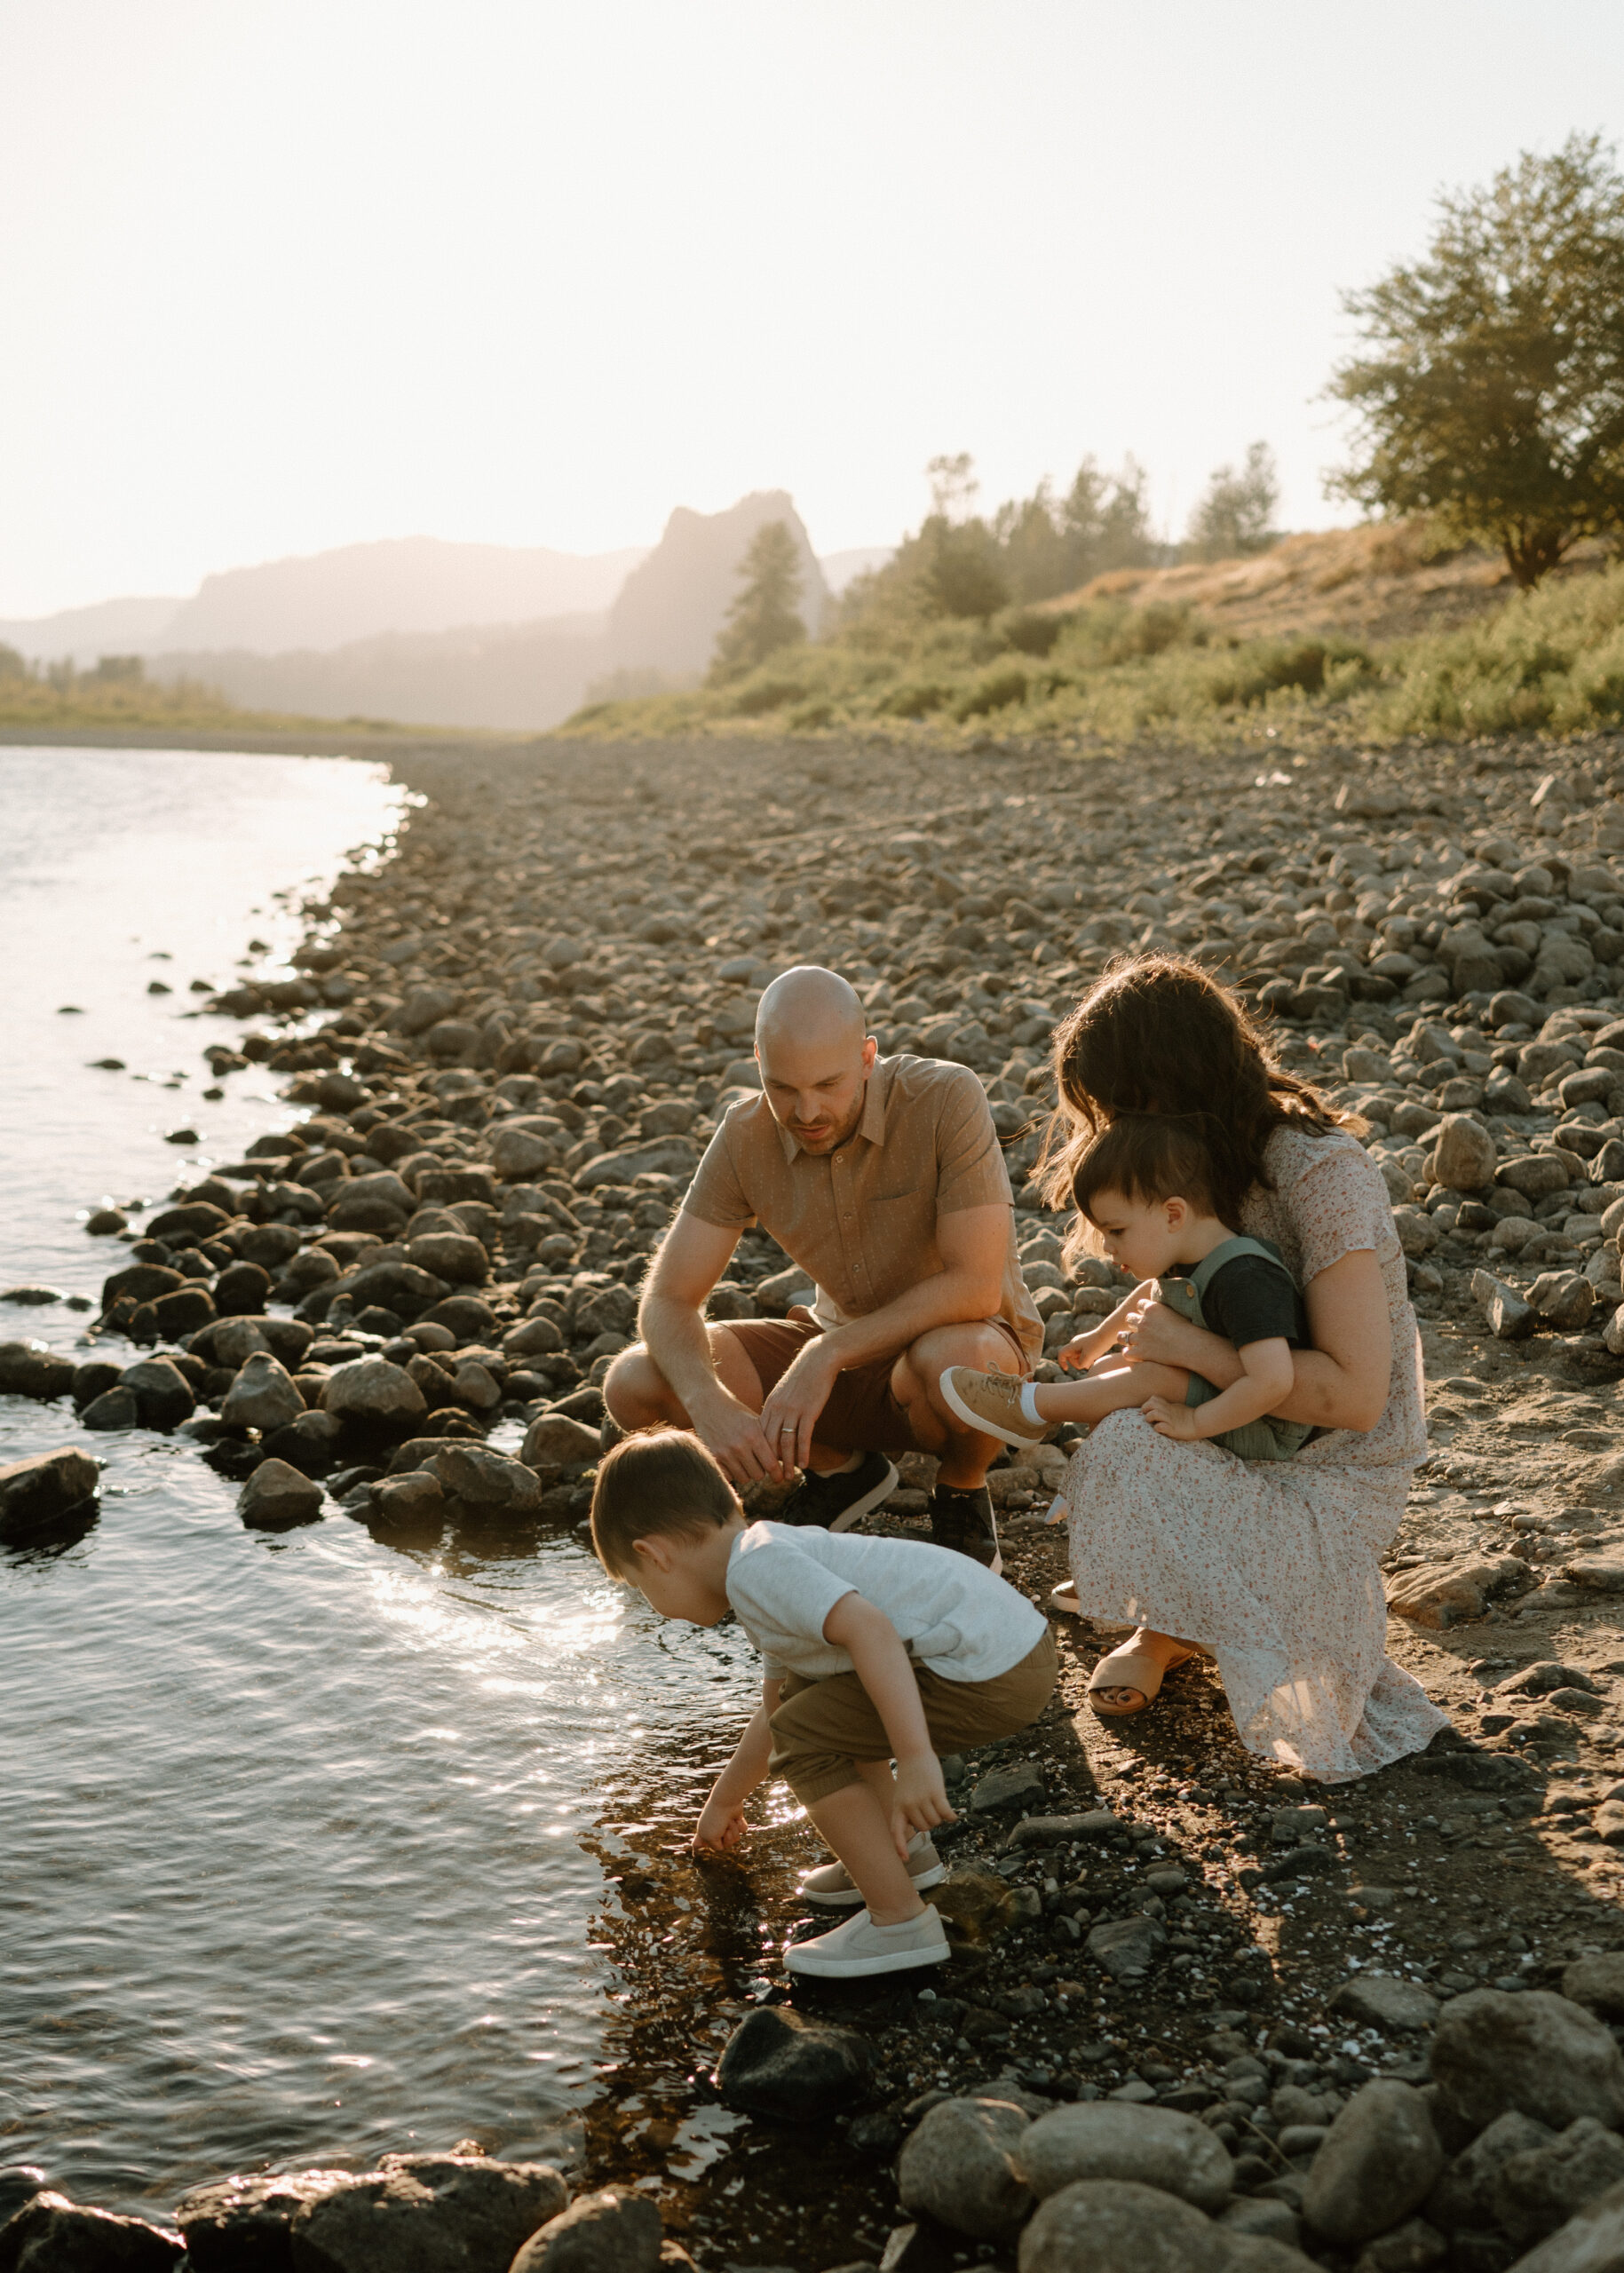 PNW Columbia River Gorge Family Photography, Washington, summer photos, what to wear for family photos. Forgette Photo